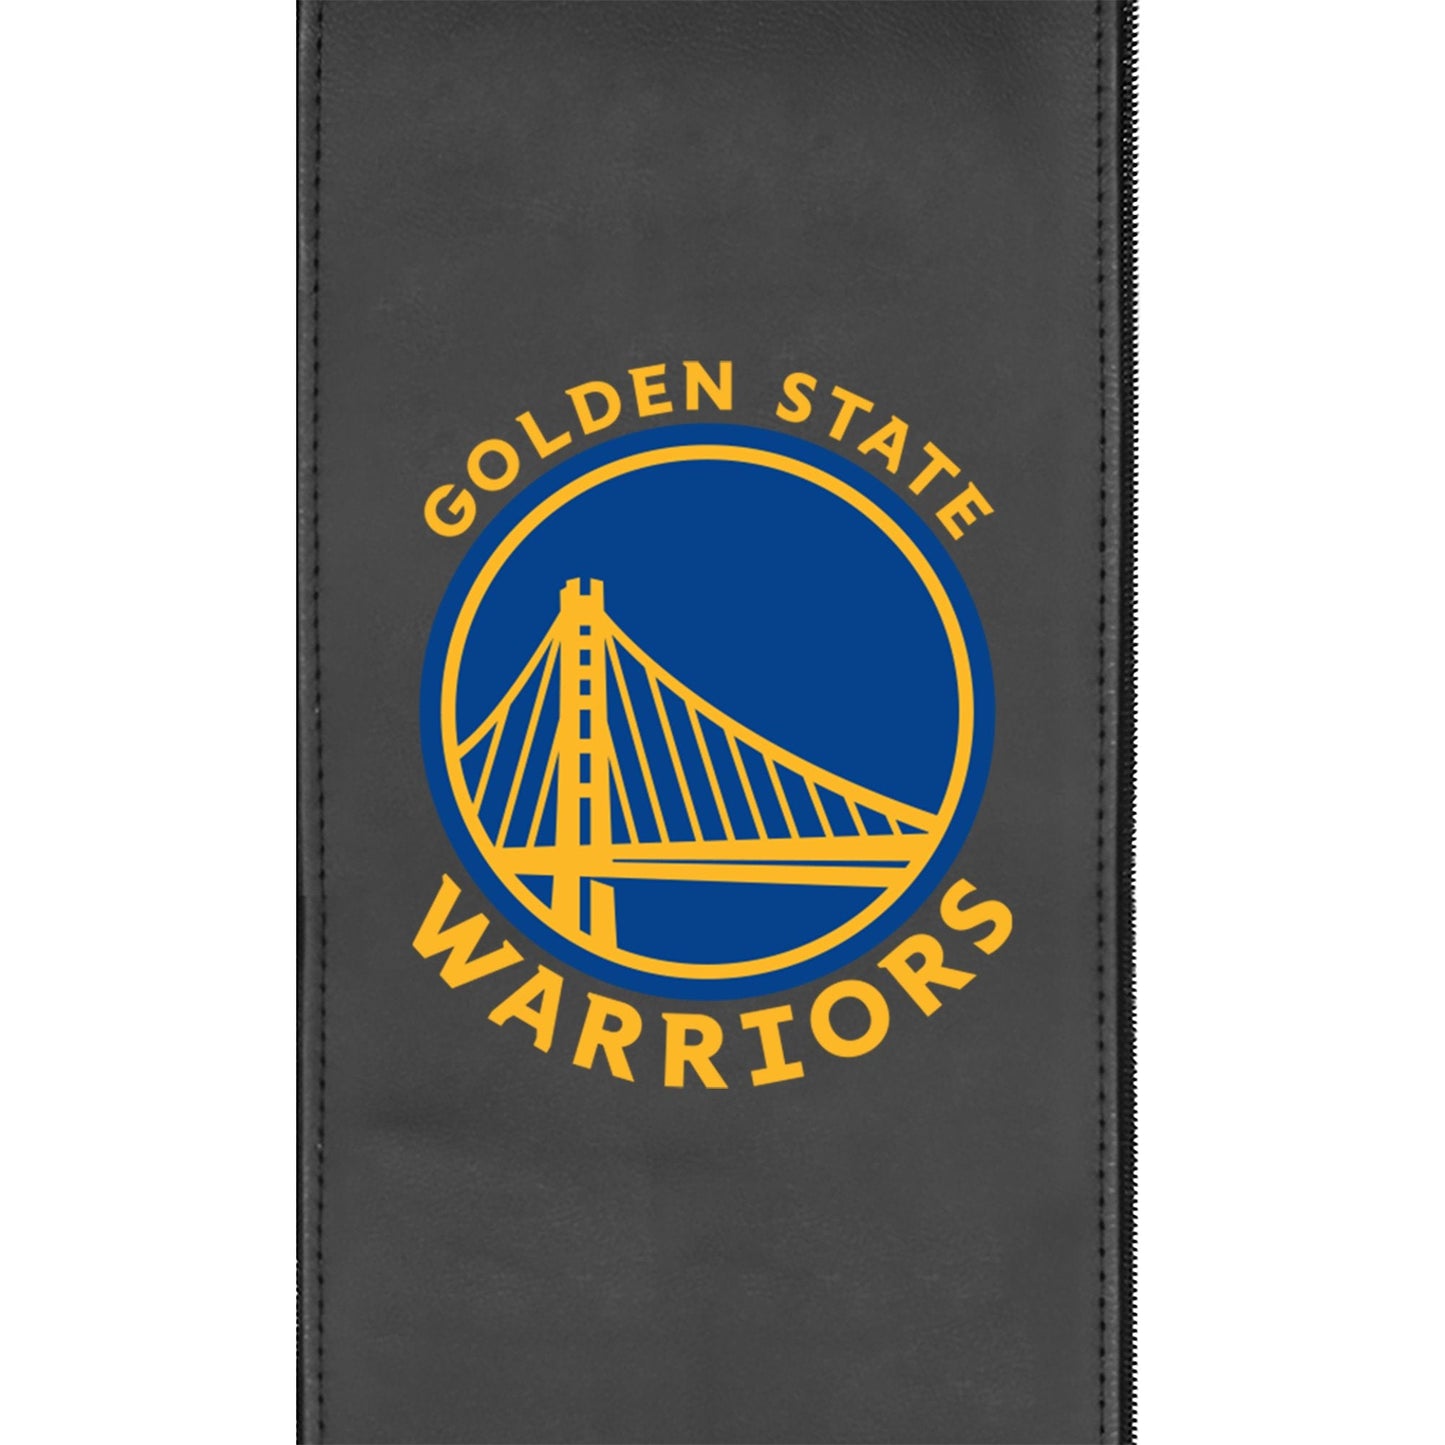 Office Chair 1000 with Golden State Warriors Global Logo